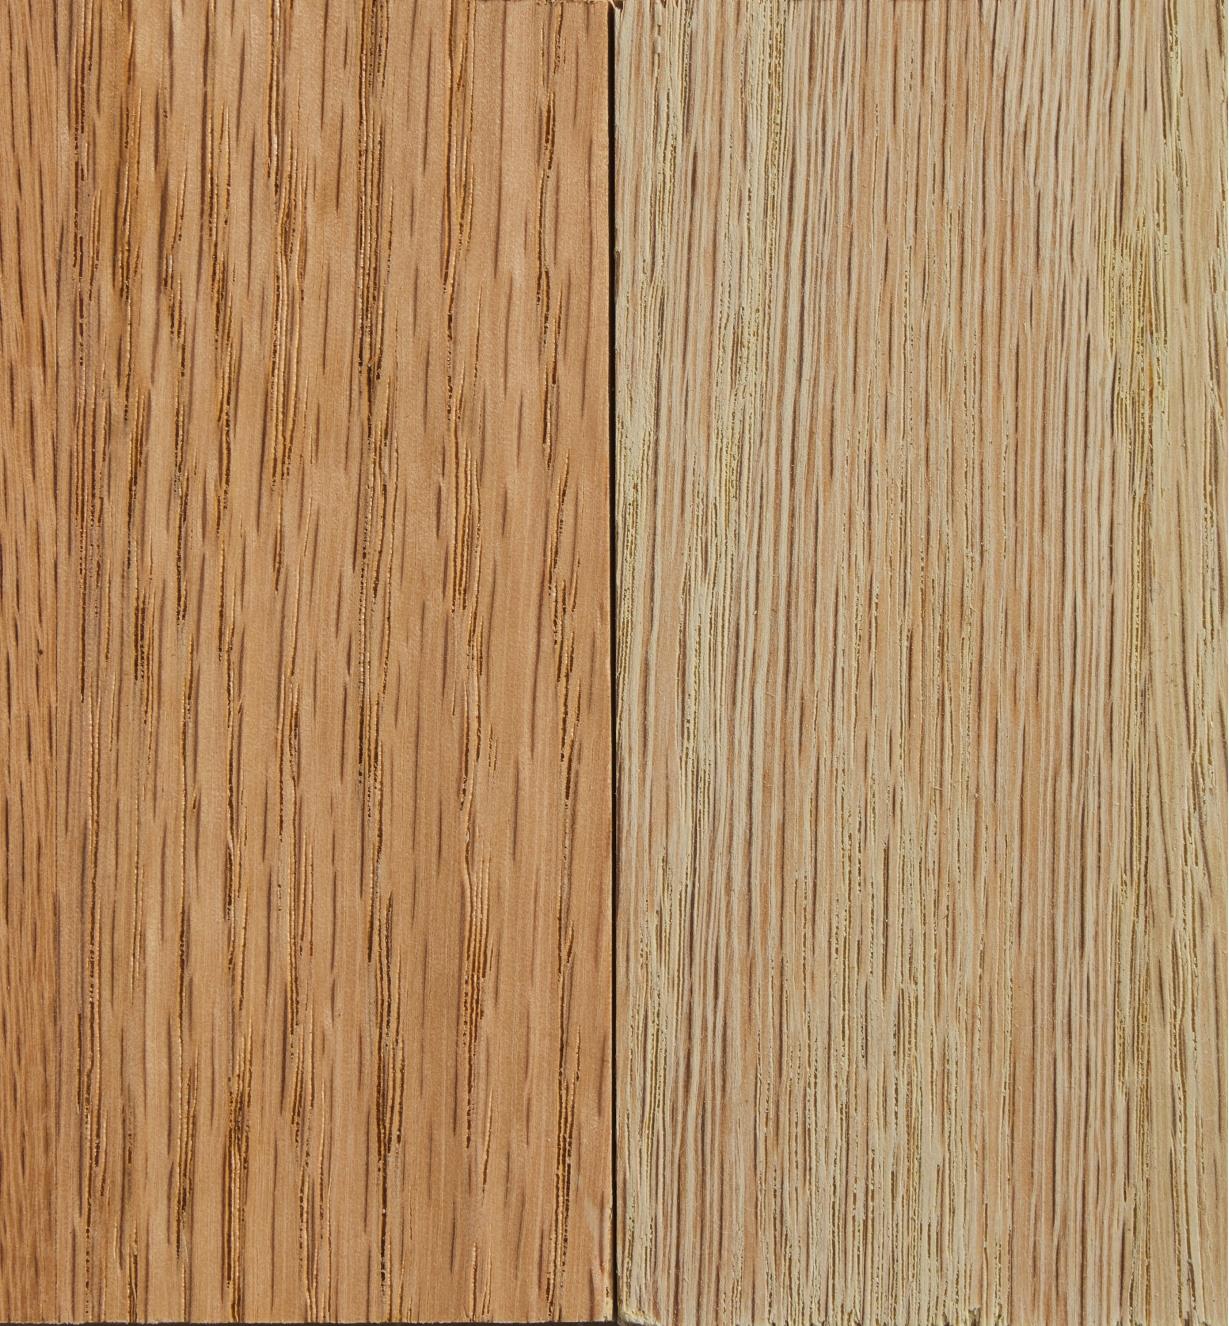 Side-by-side view of before and after using wood bleach on a wooden board